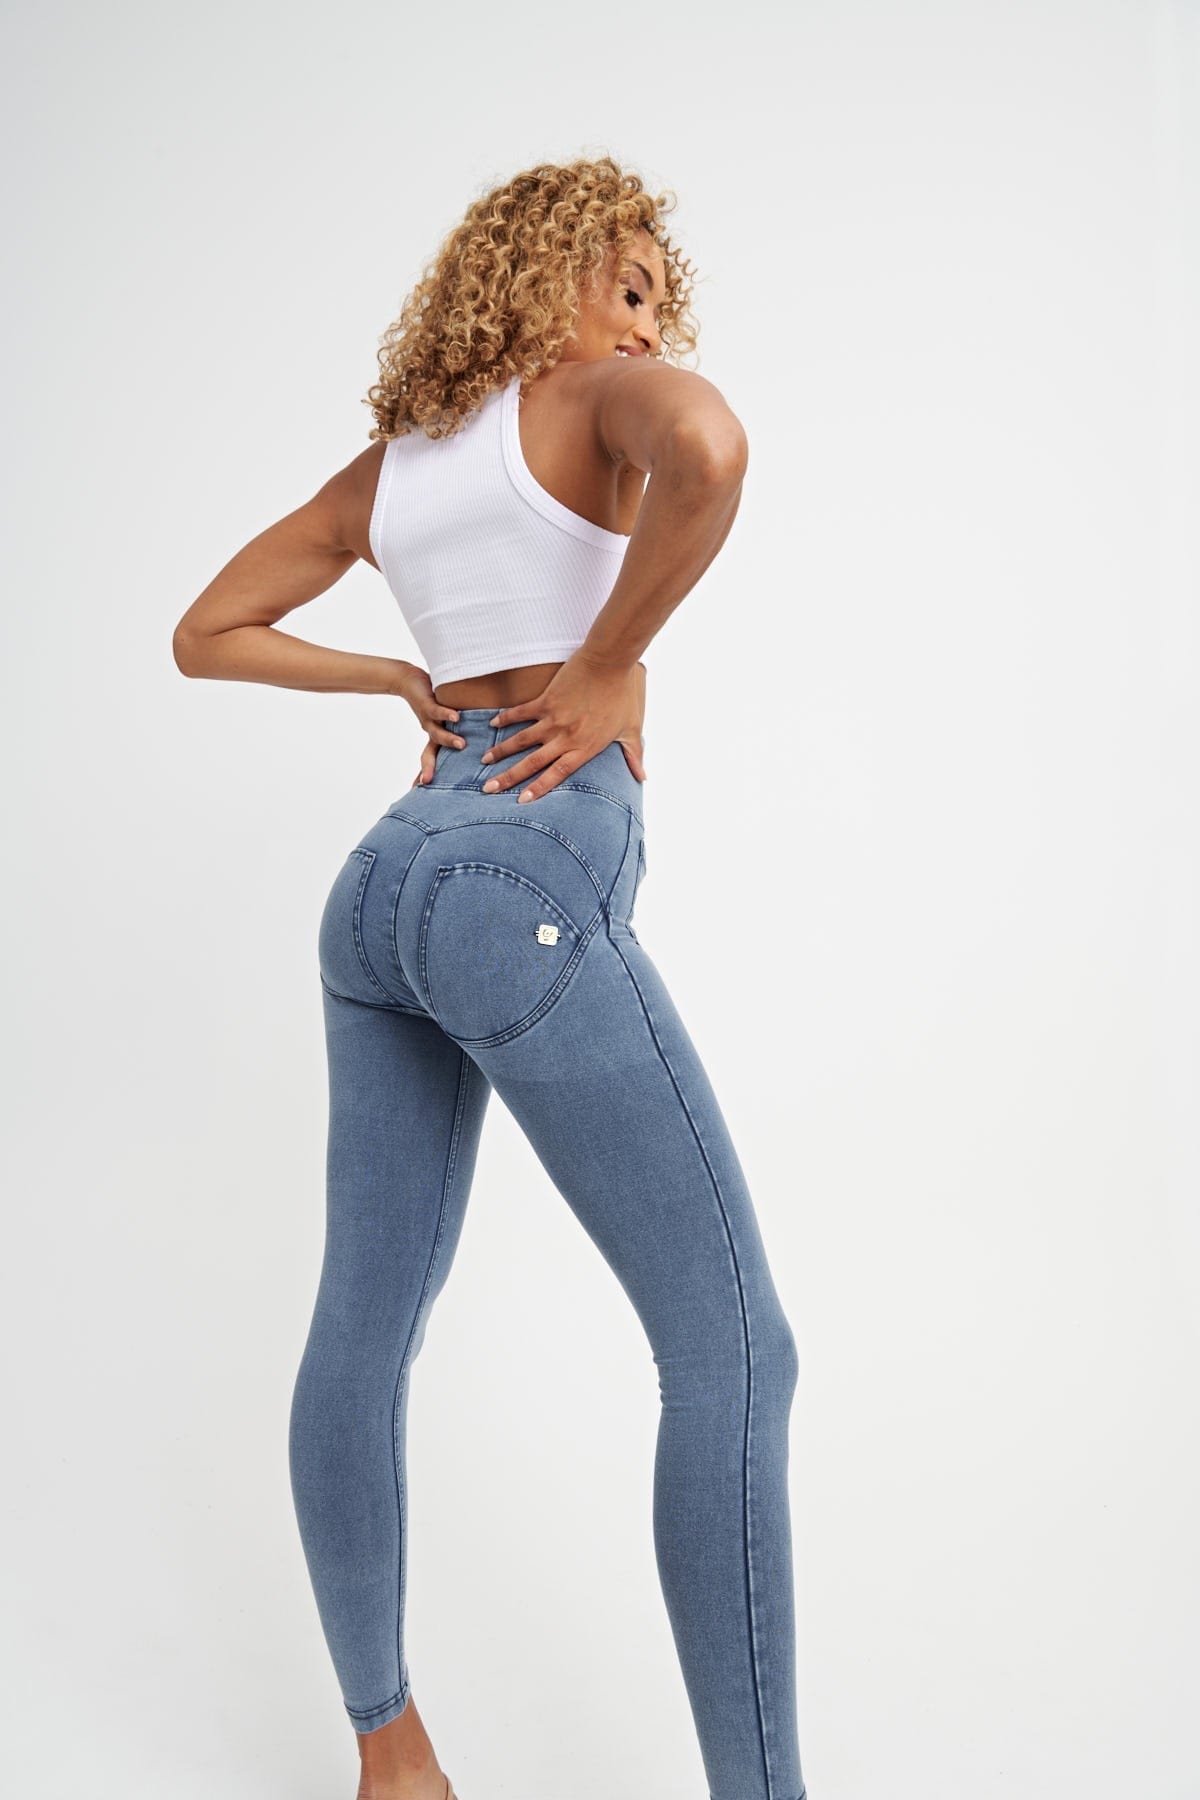 WR.UP® Denim With Front Pockets - Super High Waisted - Petite Length - Light Blue + Blue Stitching 4